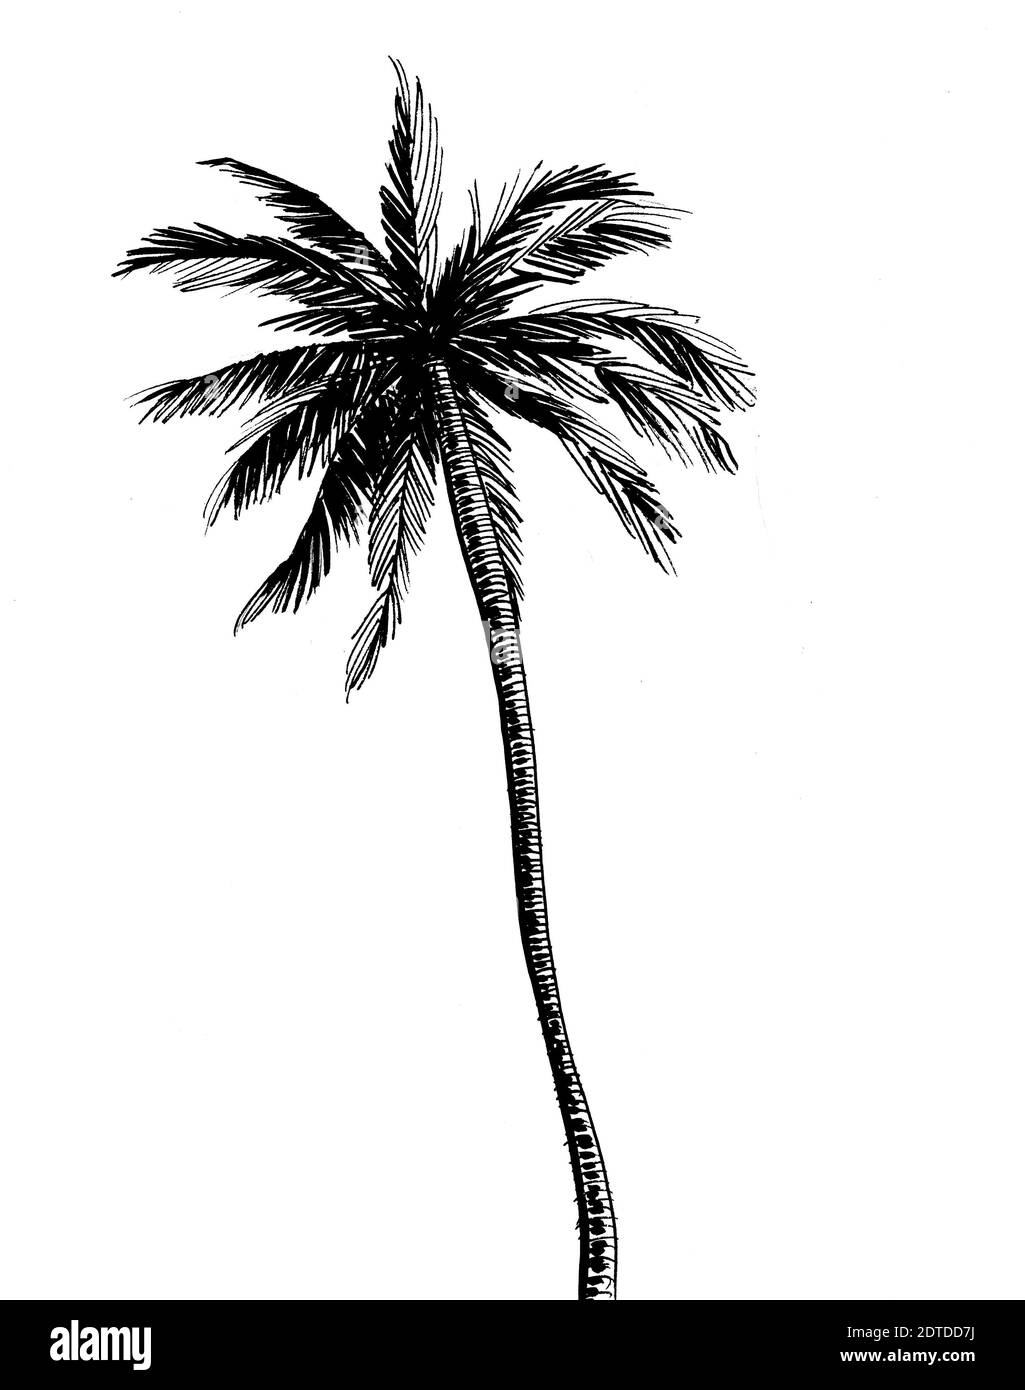 Tropical palm tree. Ink black and white drawing Stock Photo - Alamy